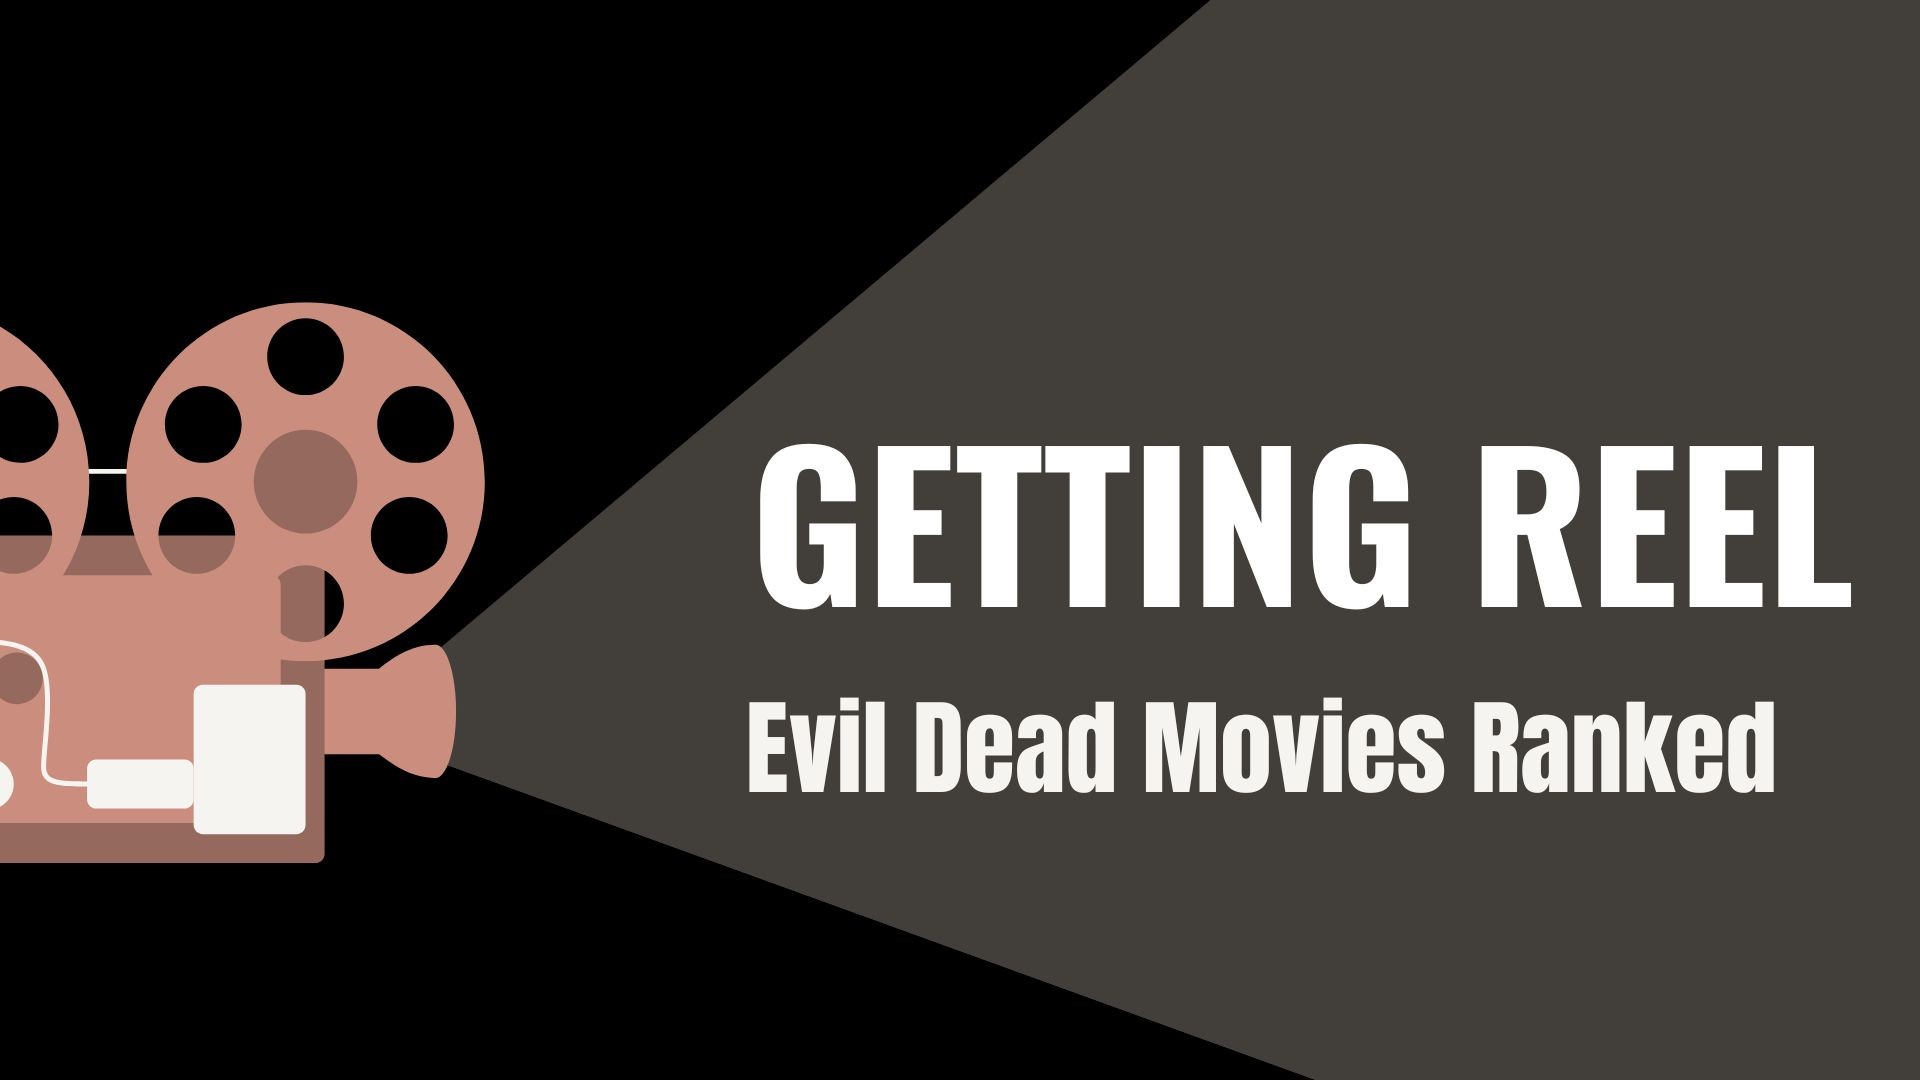 KTHV's movie reviewers rank the Evil Dead films from the first movie released in 1981 to the new one expected in 2023.